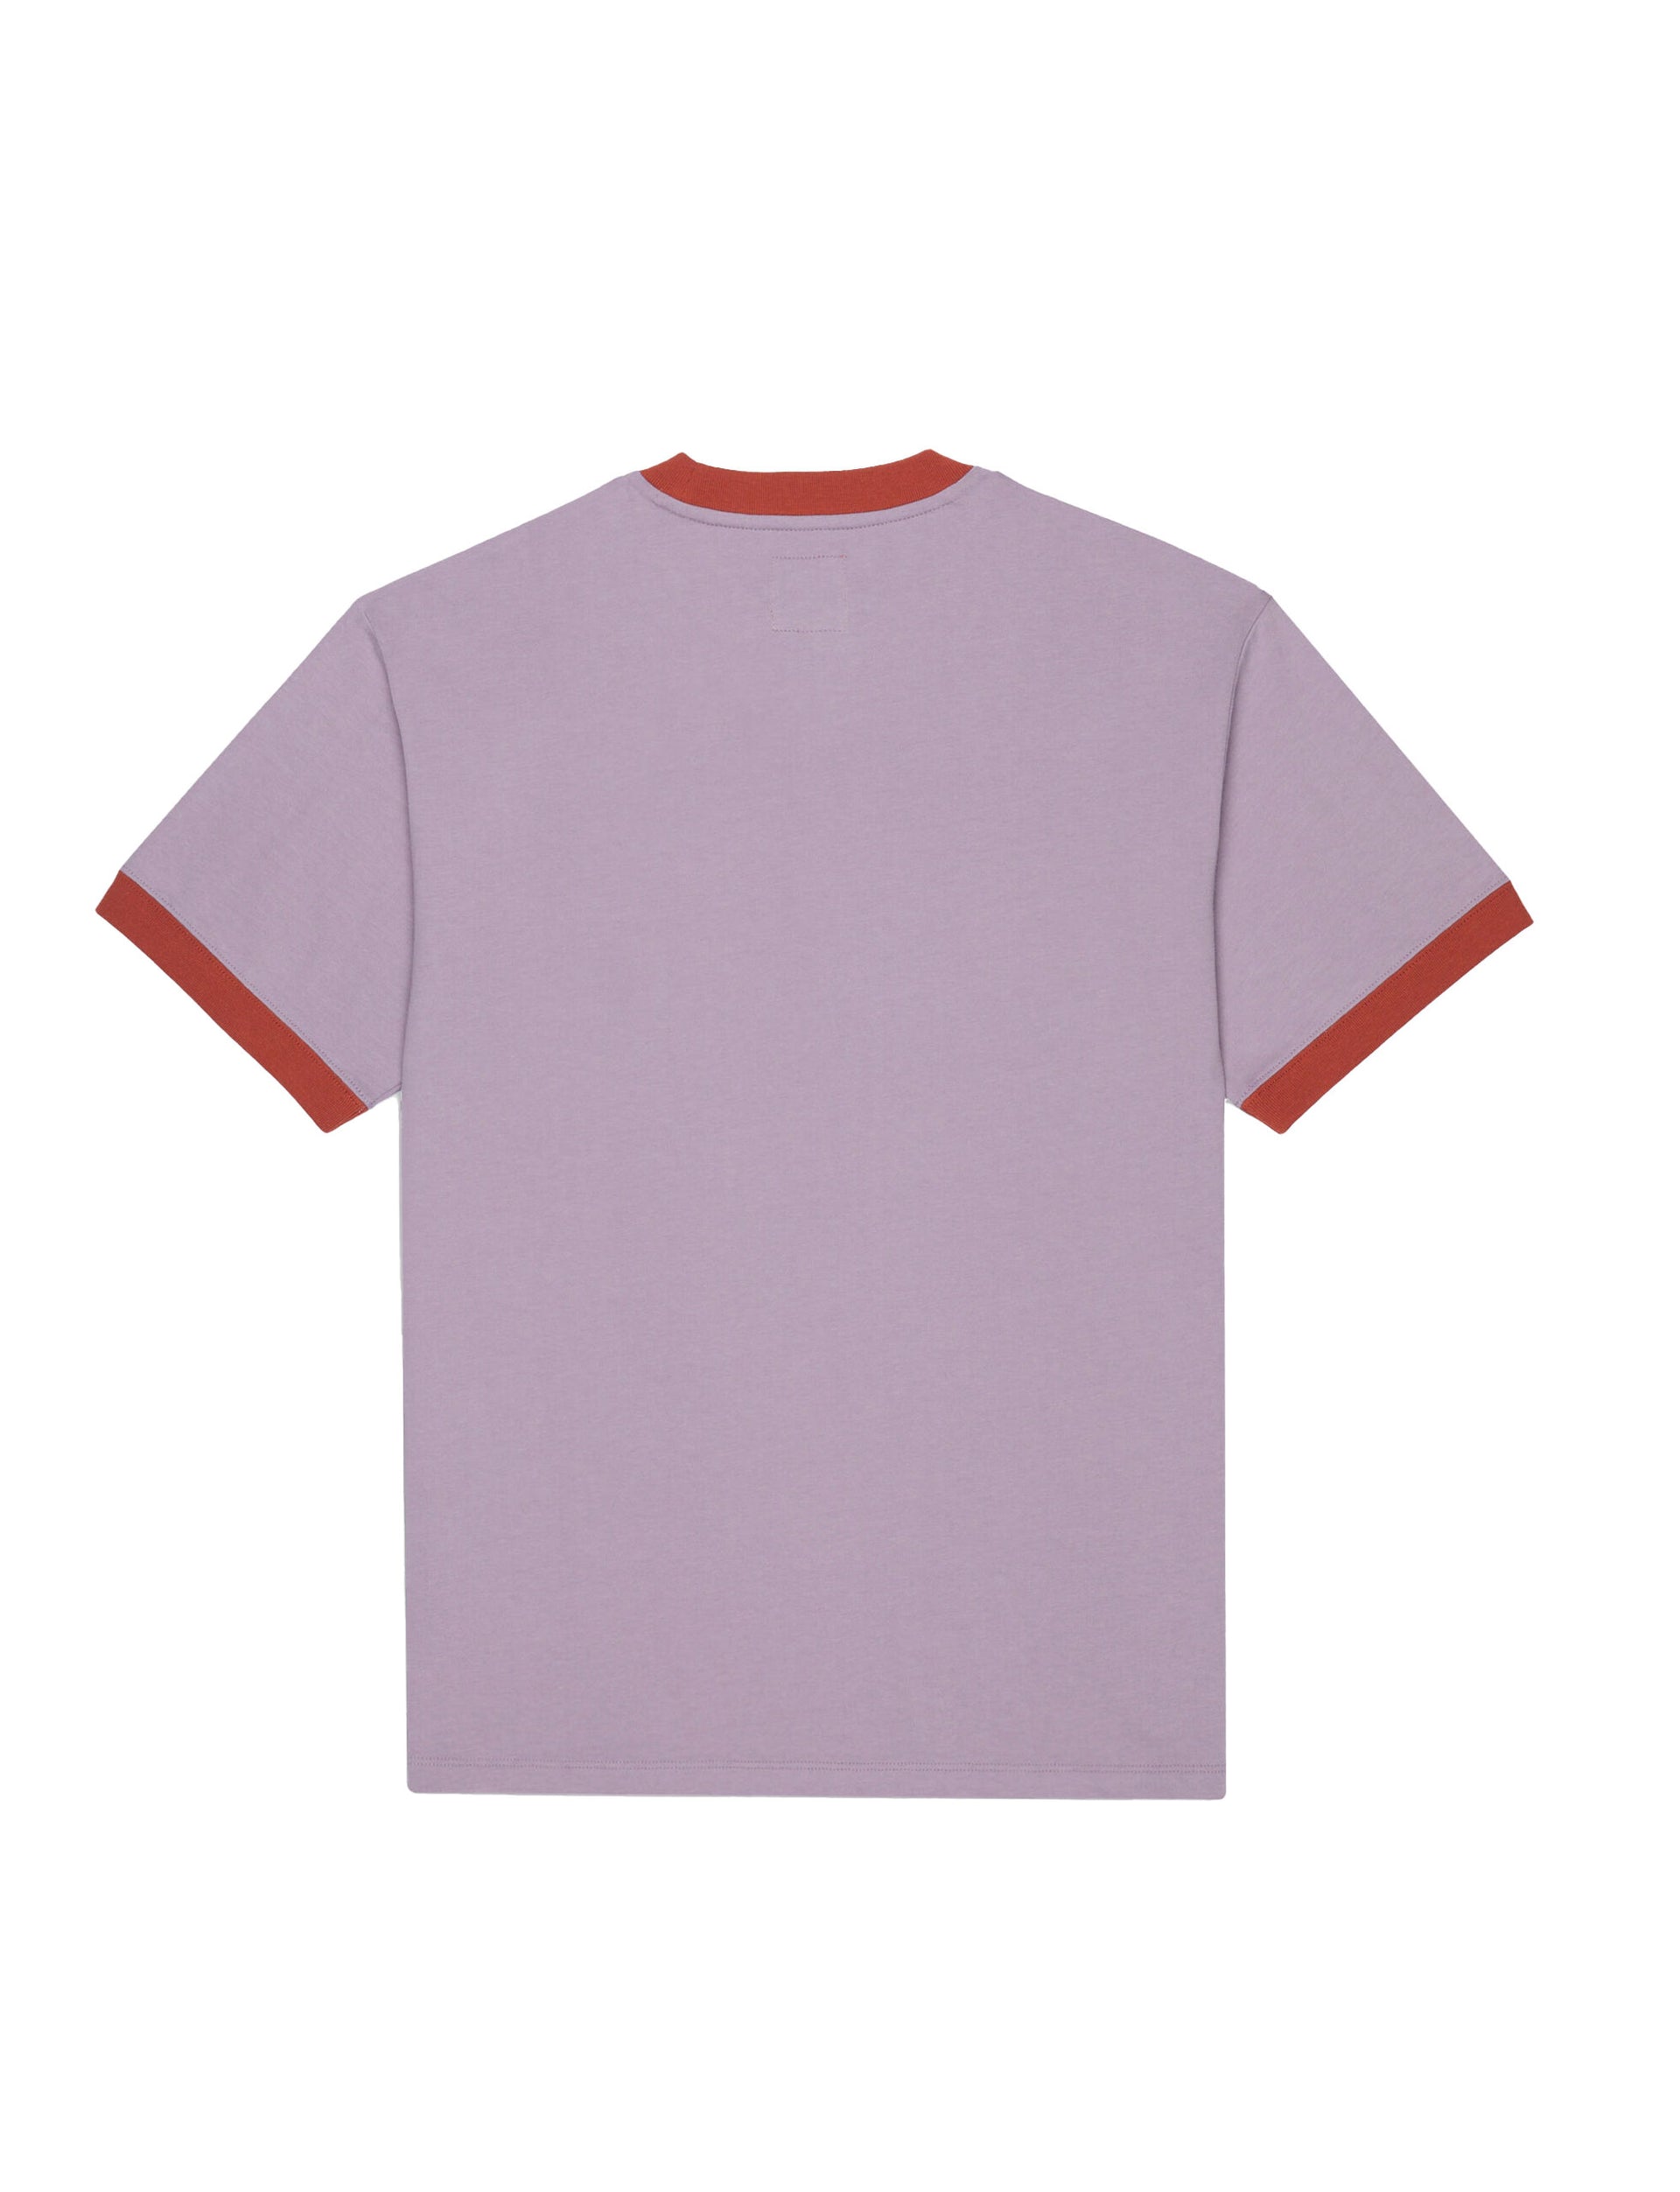 BRIAN DEAD X DICKIES EMBROIDERED RINGER TEE PURPLE ASH